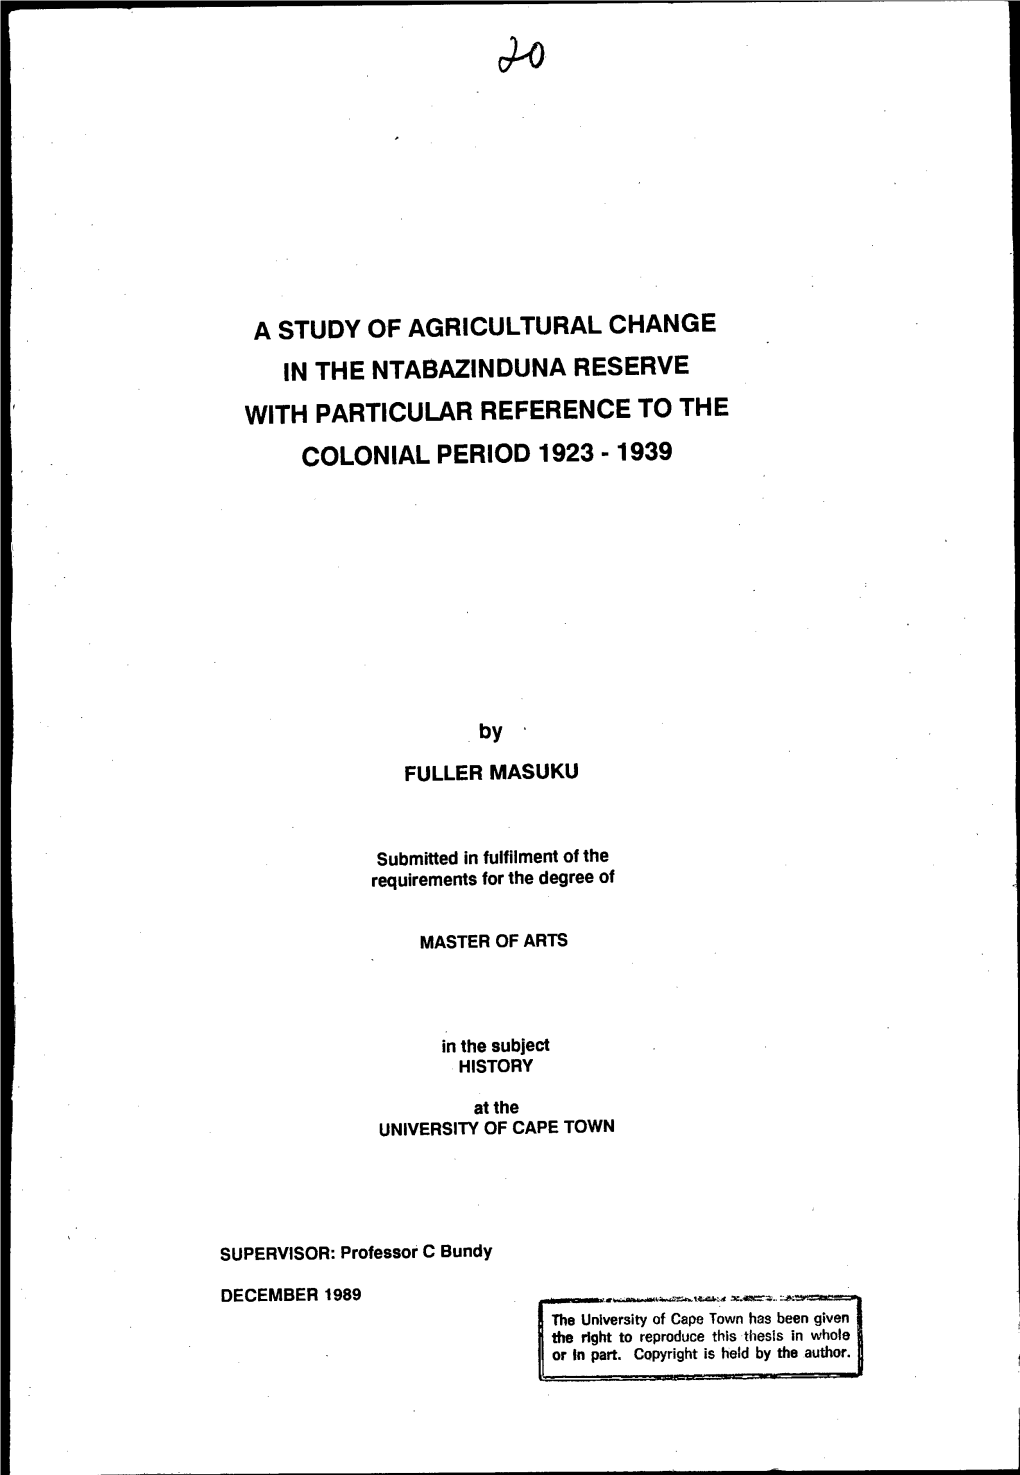 A Study of Agricultural Change in the Ntabazinduna Reserve with Particular Reference to the Colonial Period 1923-1939